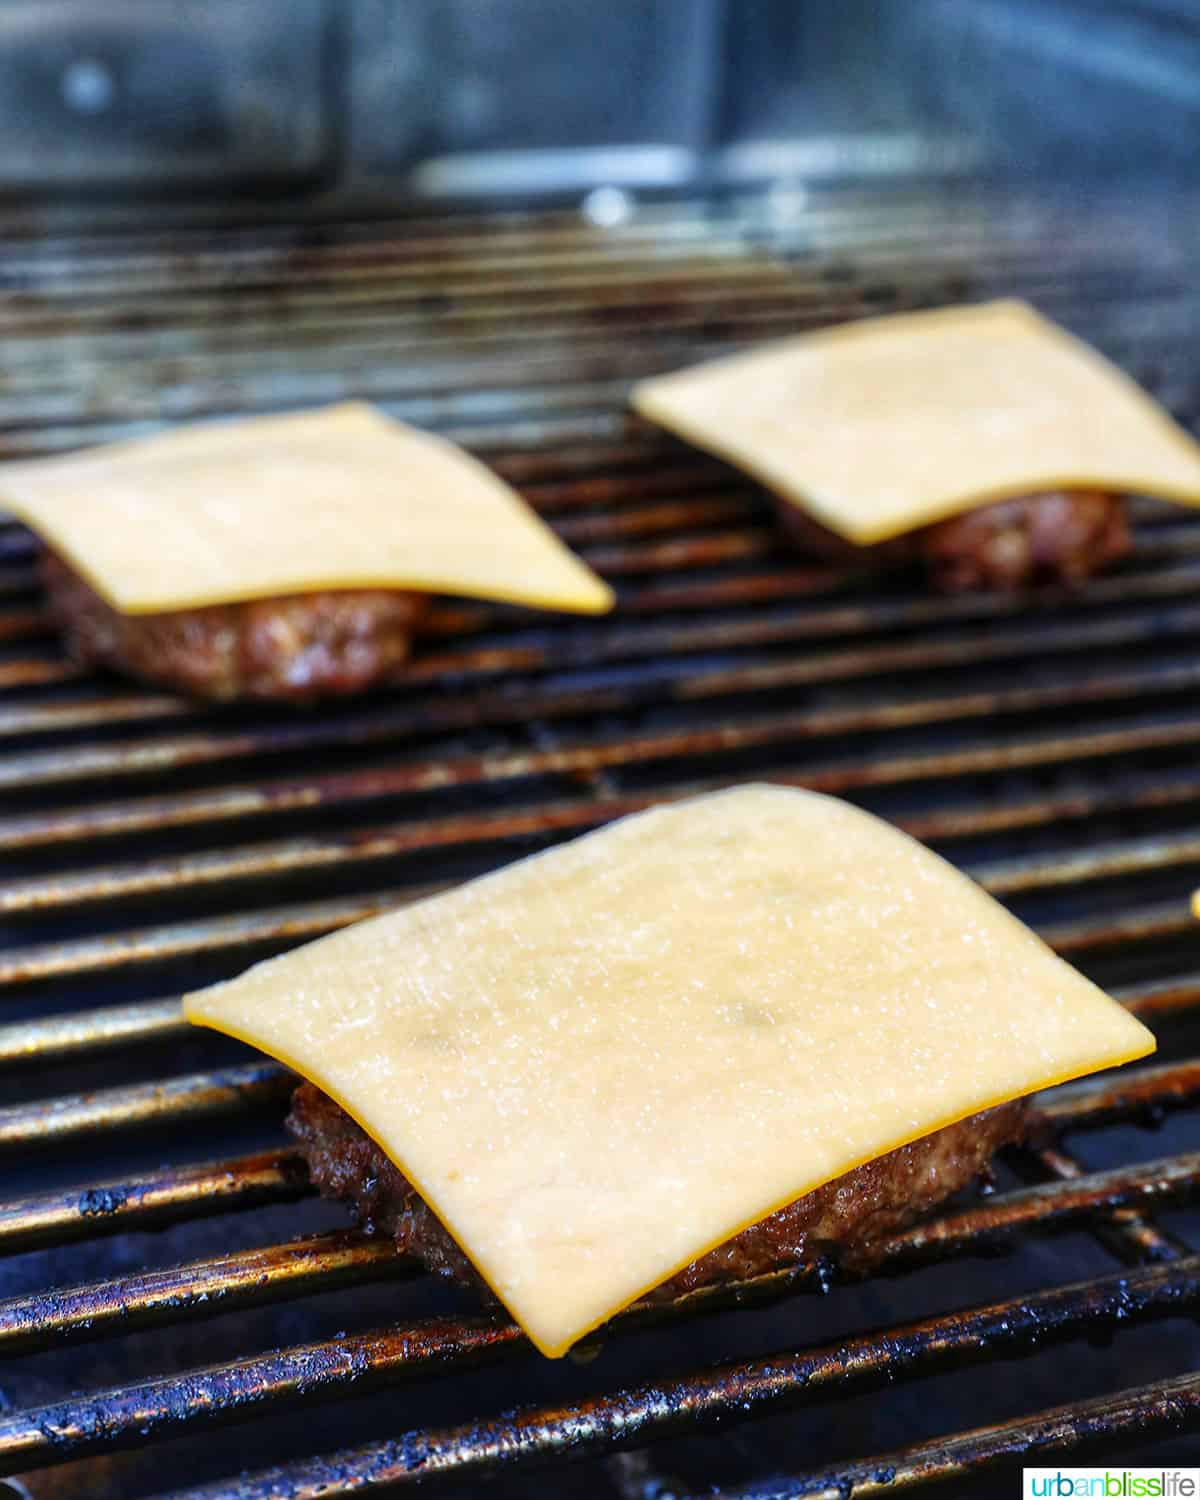 burgers topped with cheese on a grill